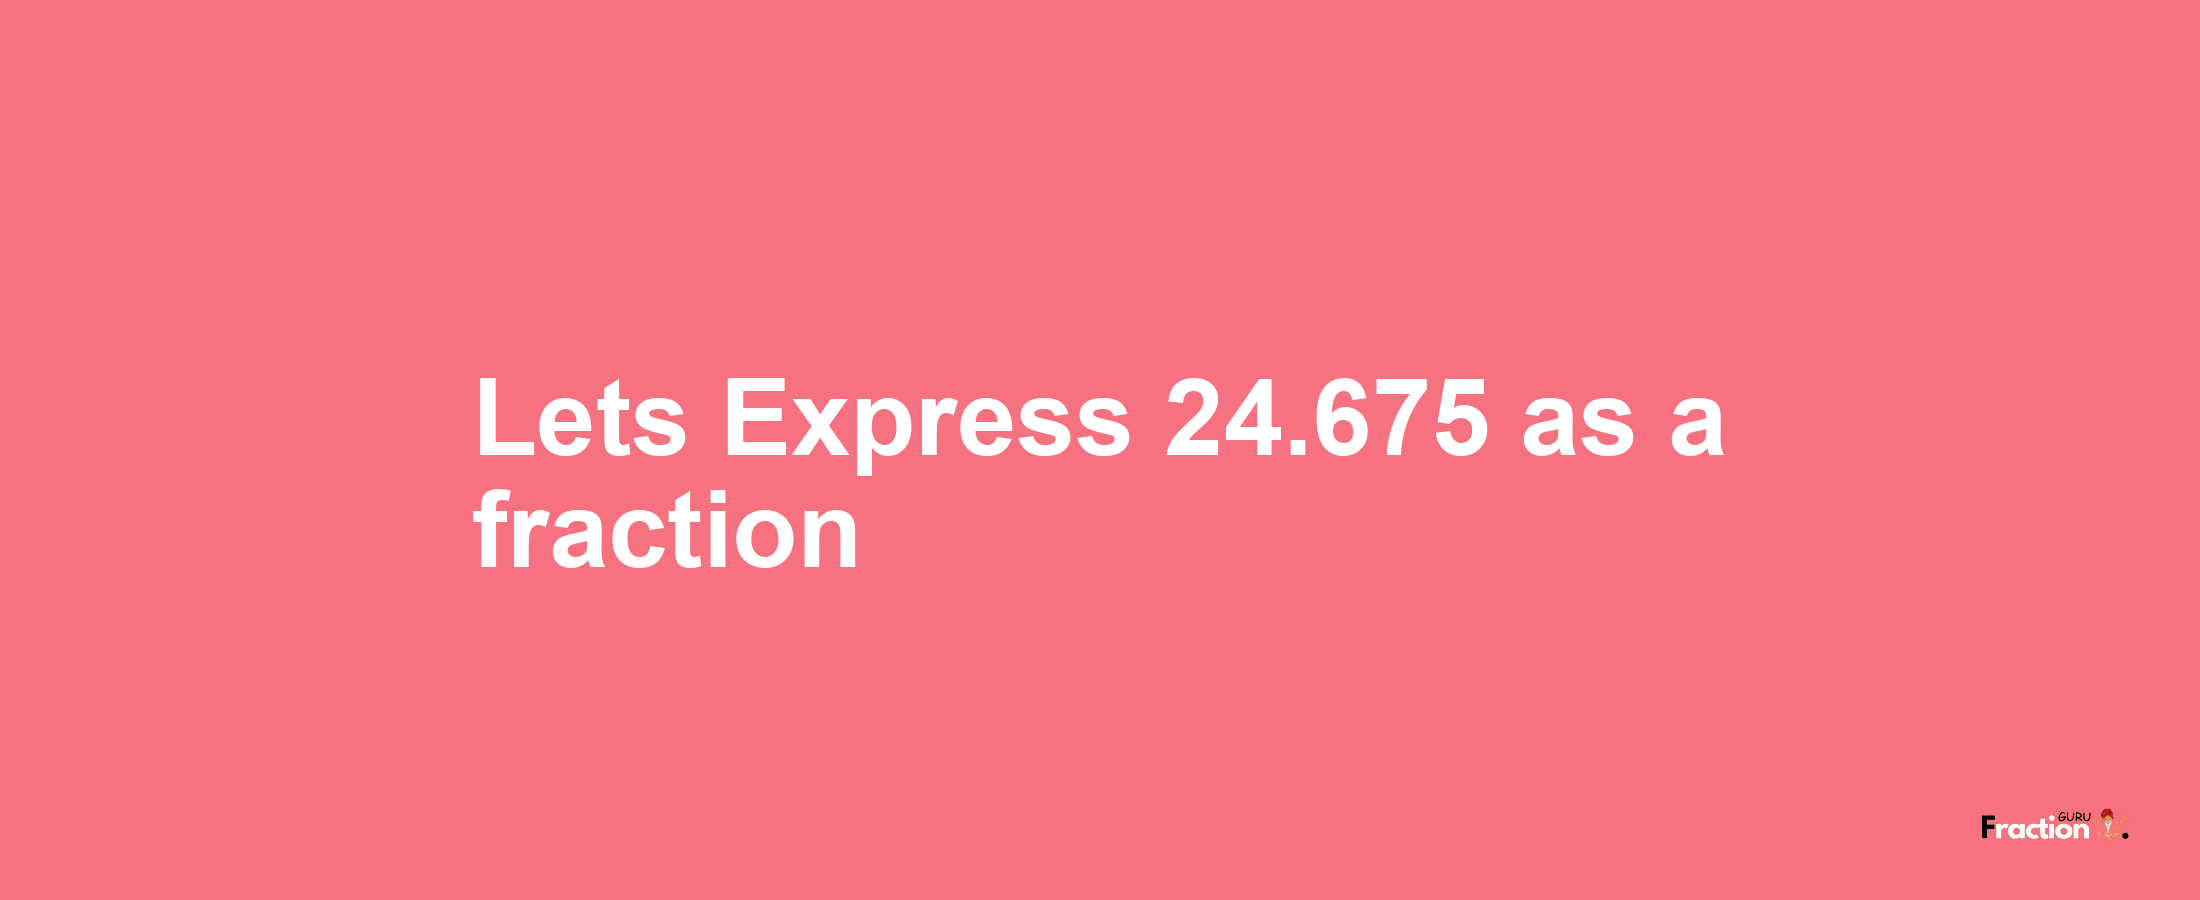 Lets Express 24.675 as afraction